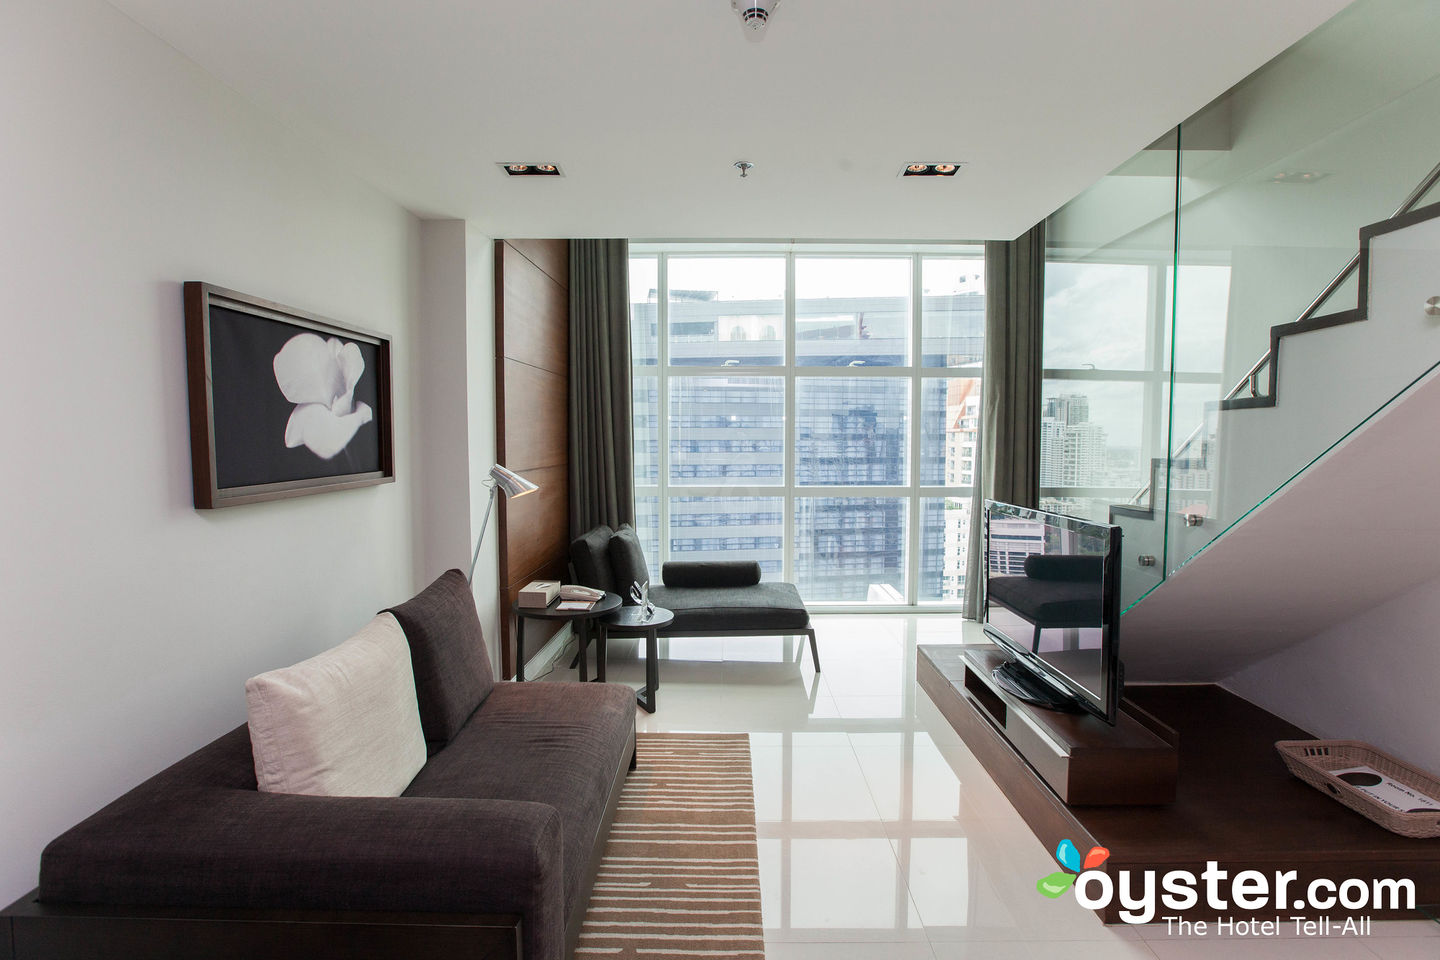 S31 Sukhumvit Hotel Review What To Really Expect If You Stay